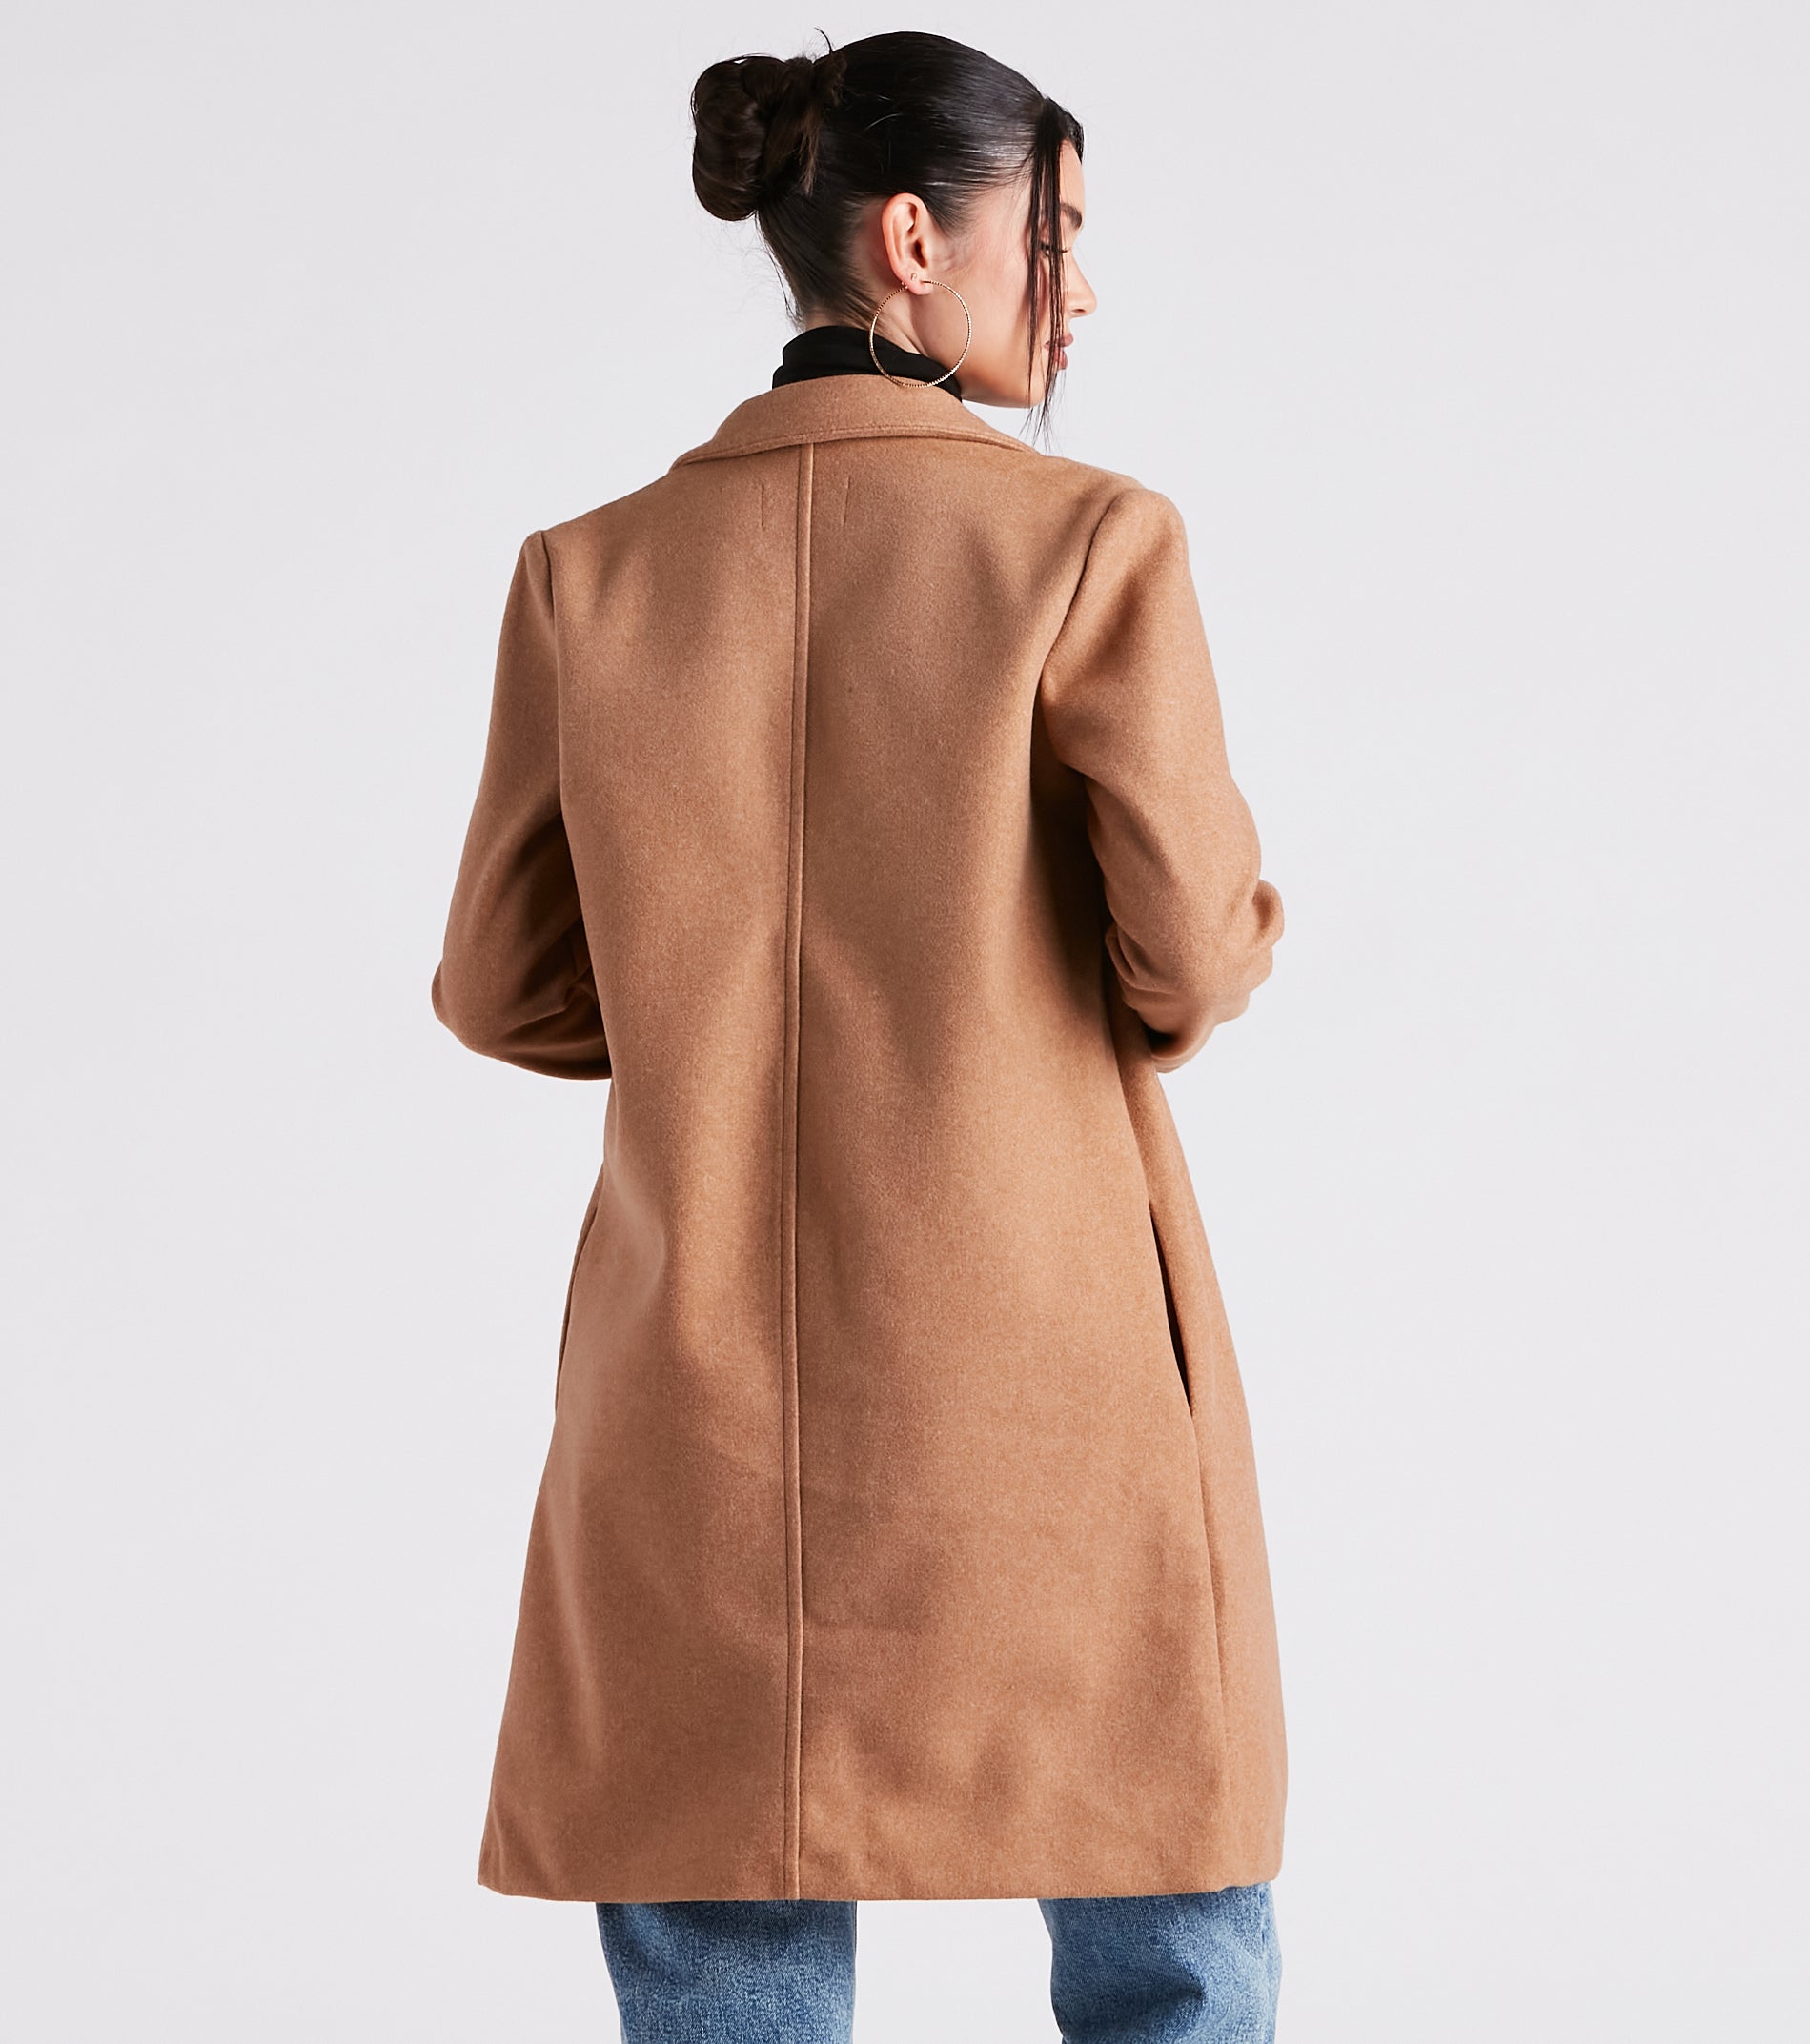 Central Park Chic Trench Coat